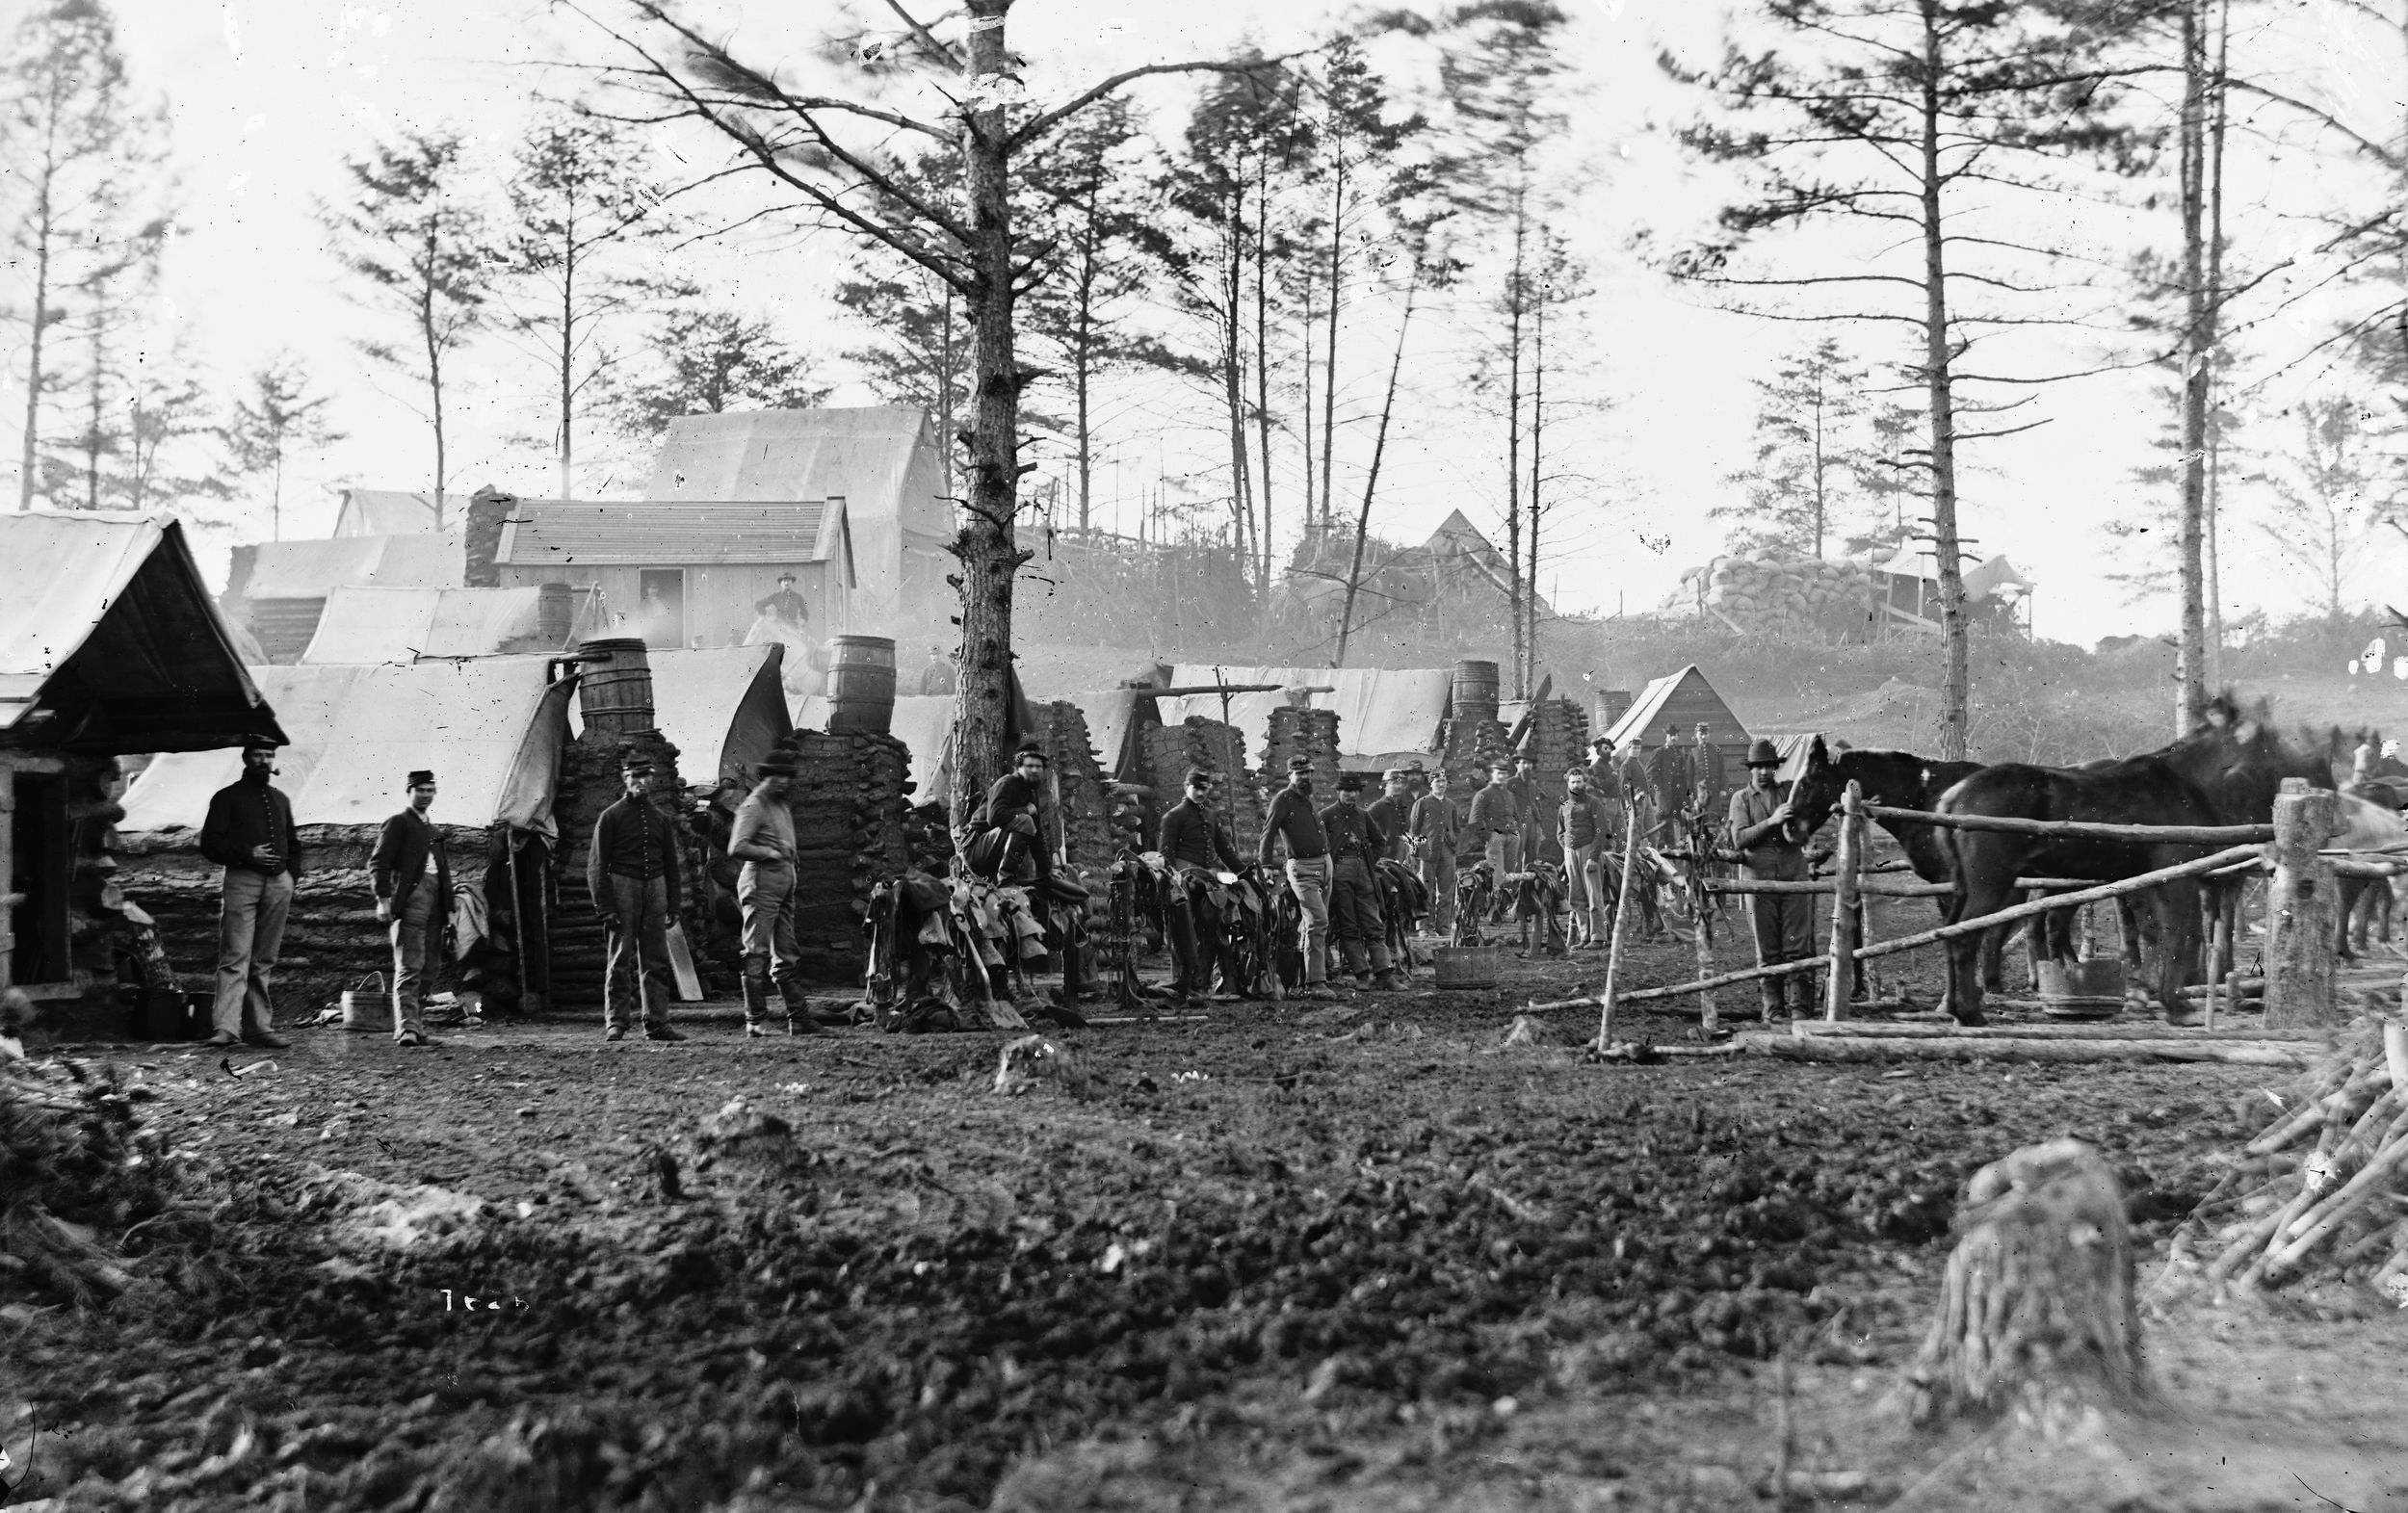 Camp of the 18th Pennsylvania Cavalry at Brandy Station, Virginia, site of the largest cavalry clash of the Civil War.